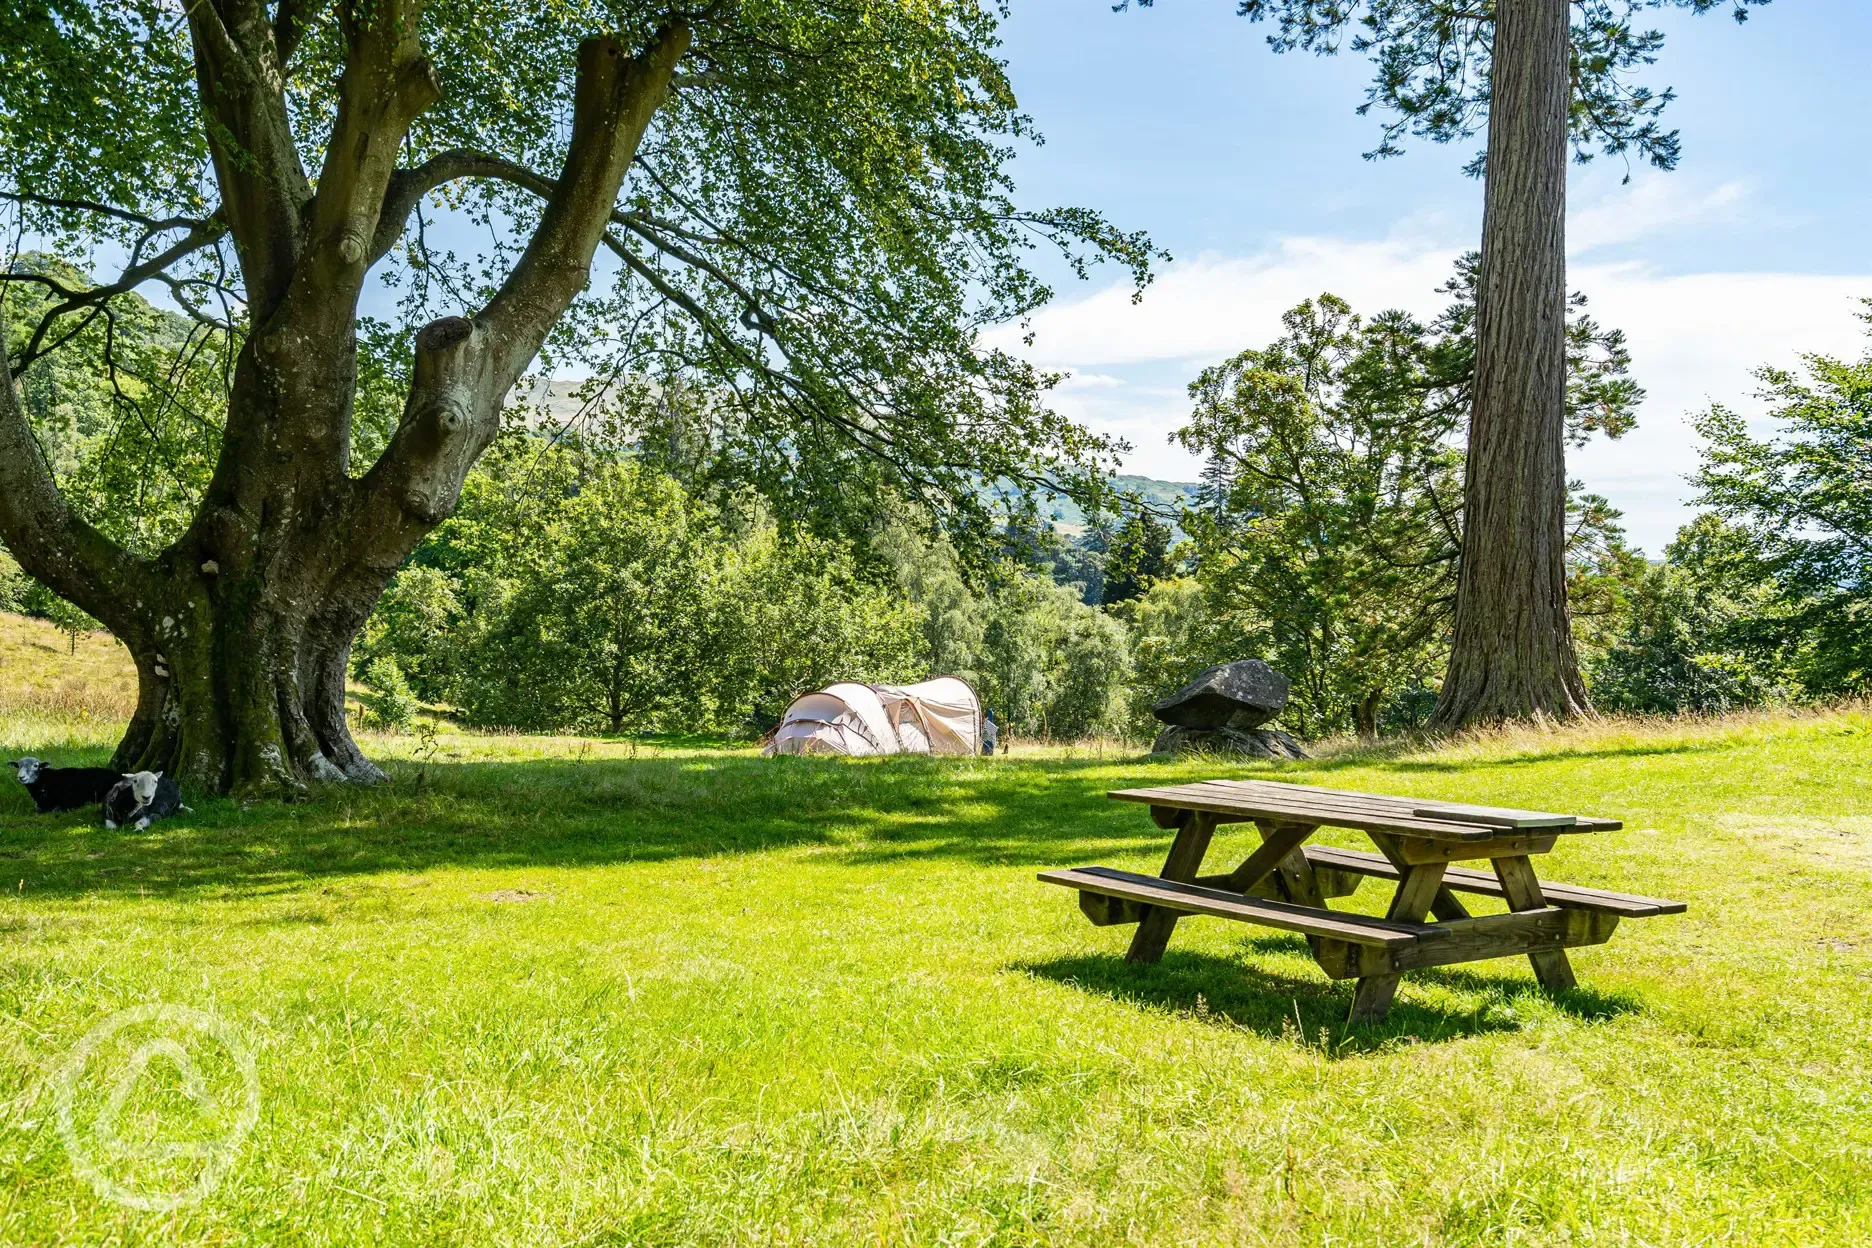 Picnic benches in the camping area